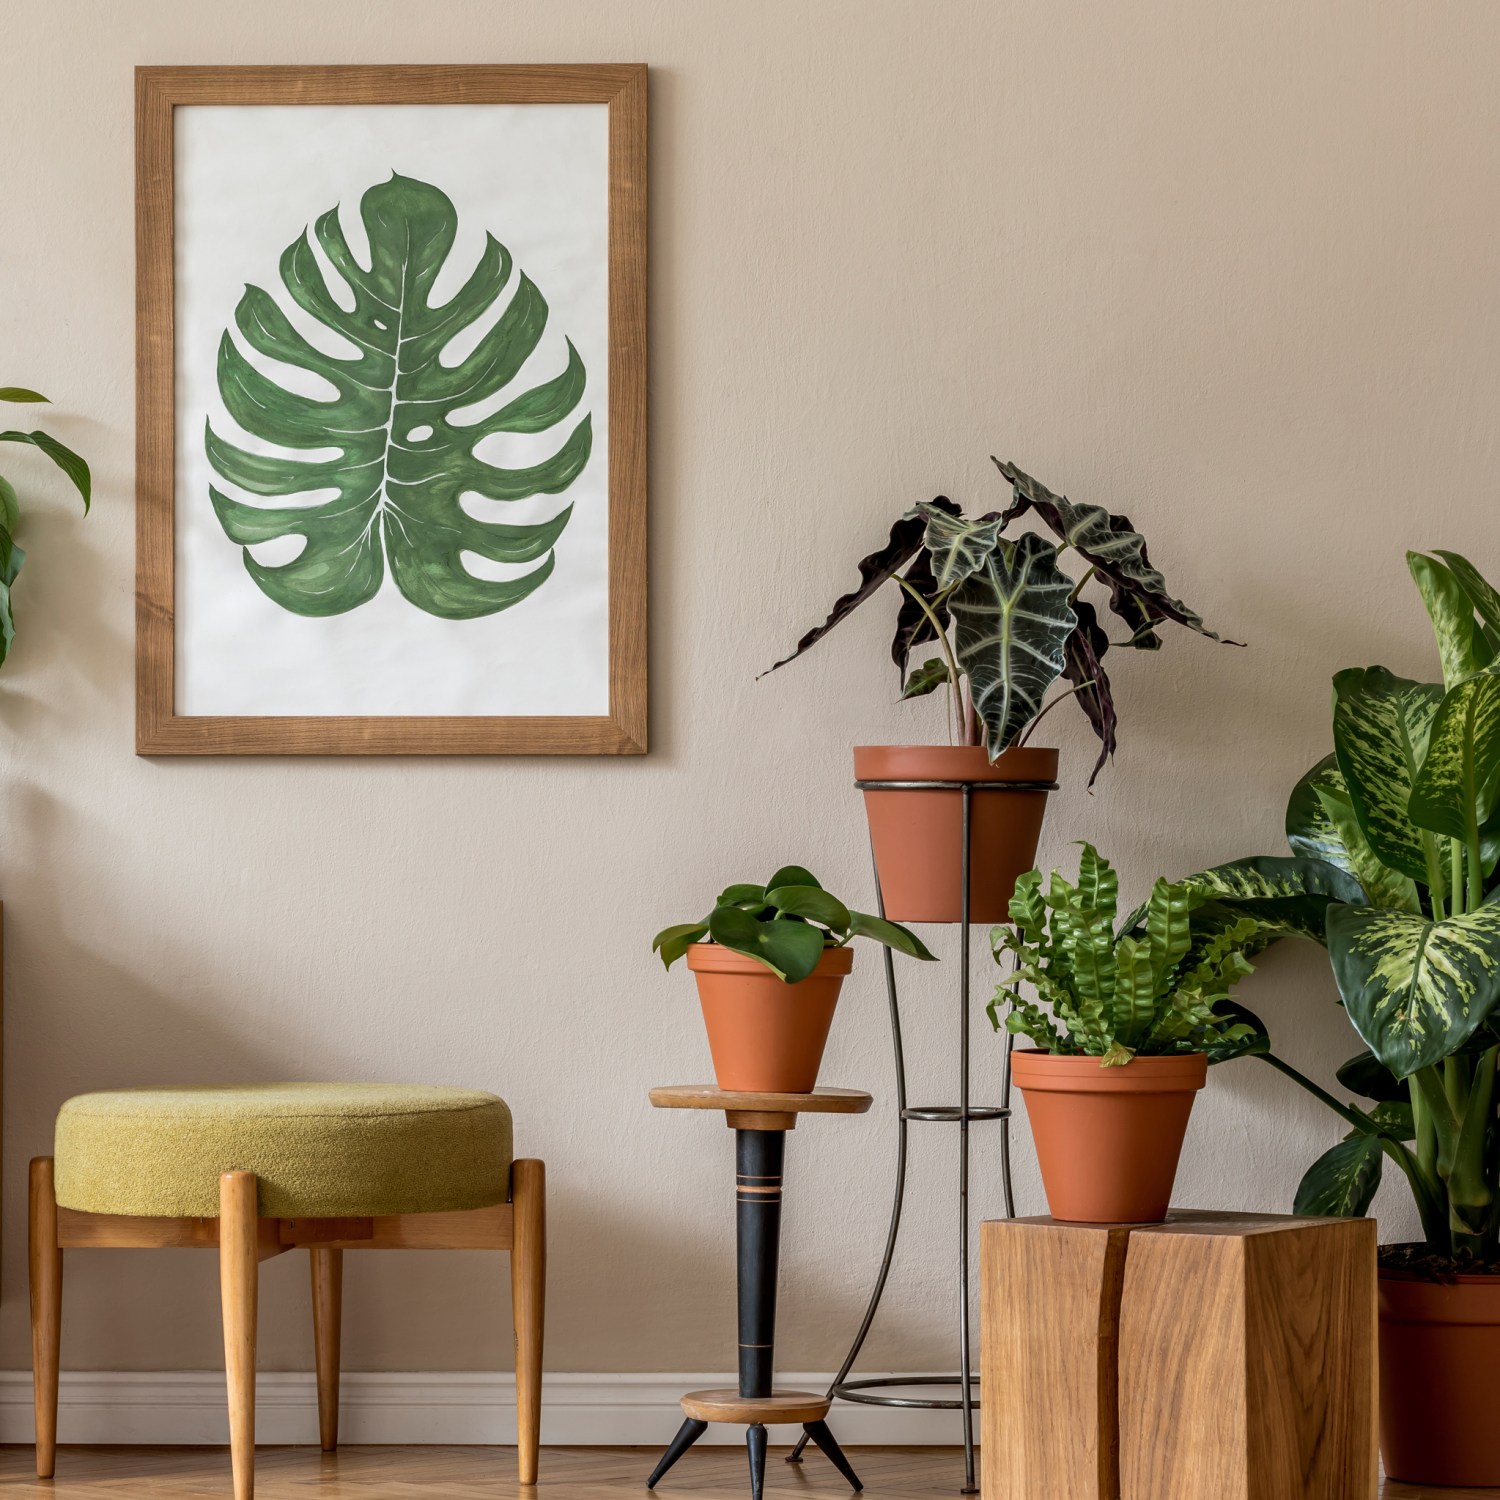 variety of well cared for Indoor houseplants in a stylish home living room with vintage furniture